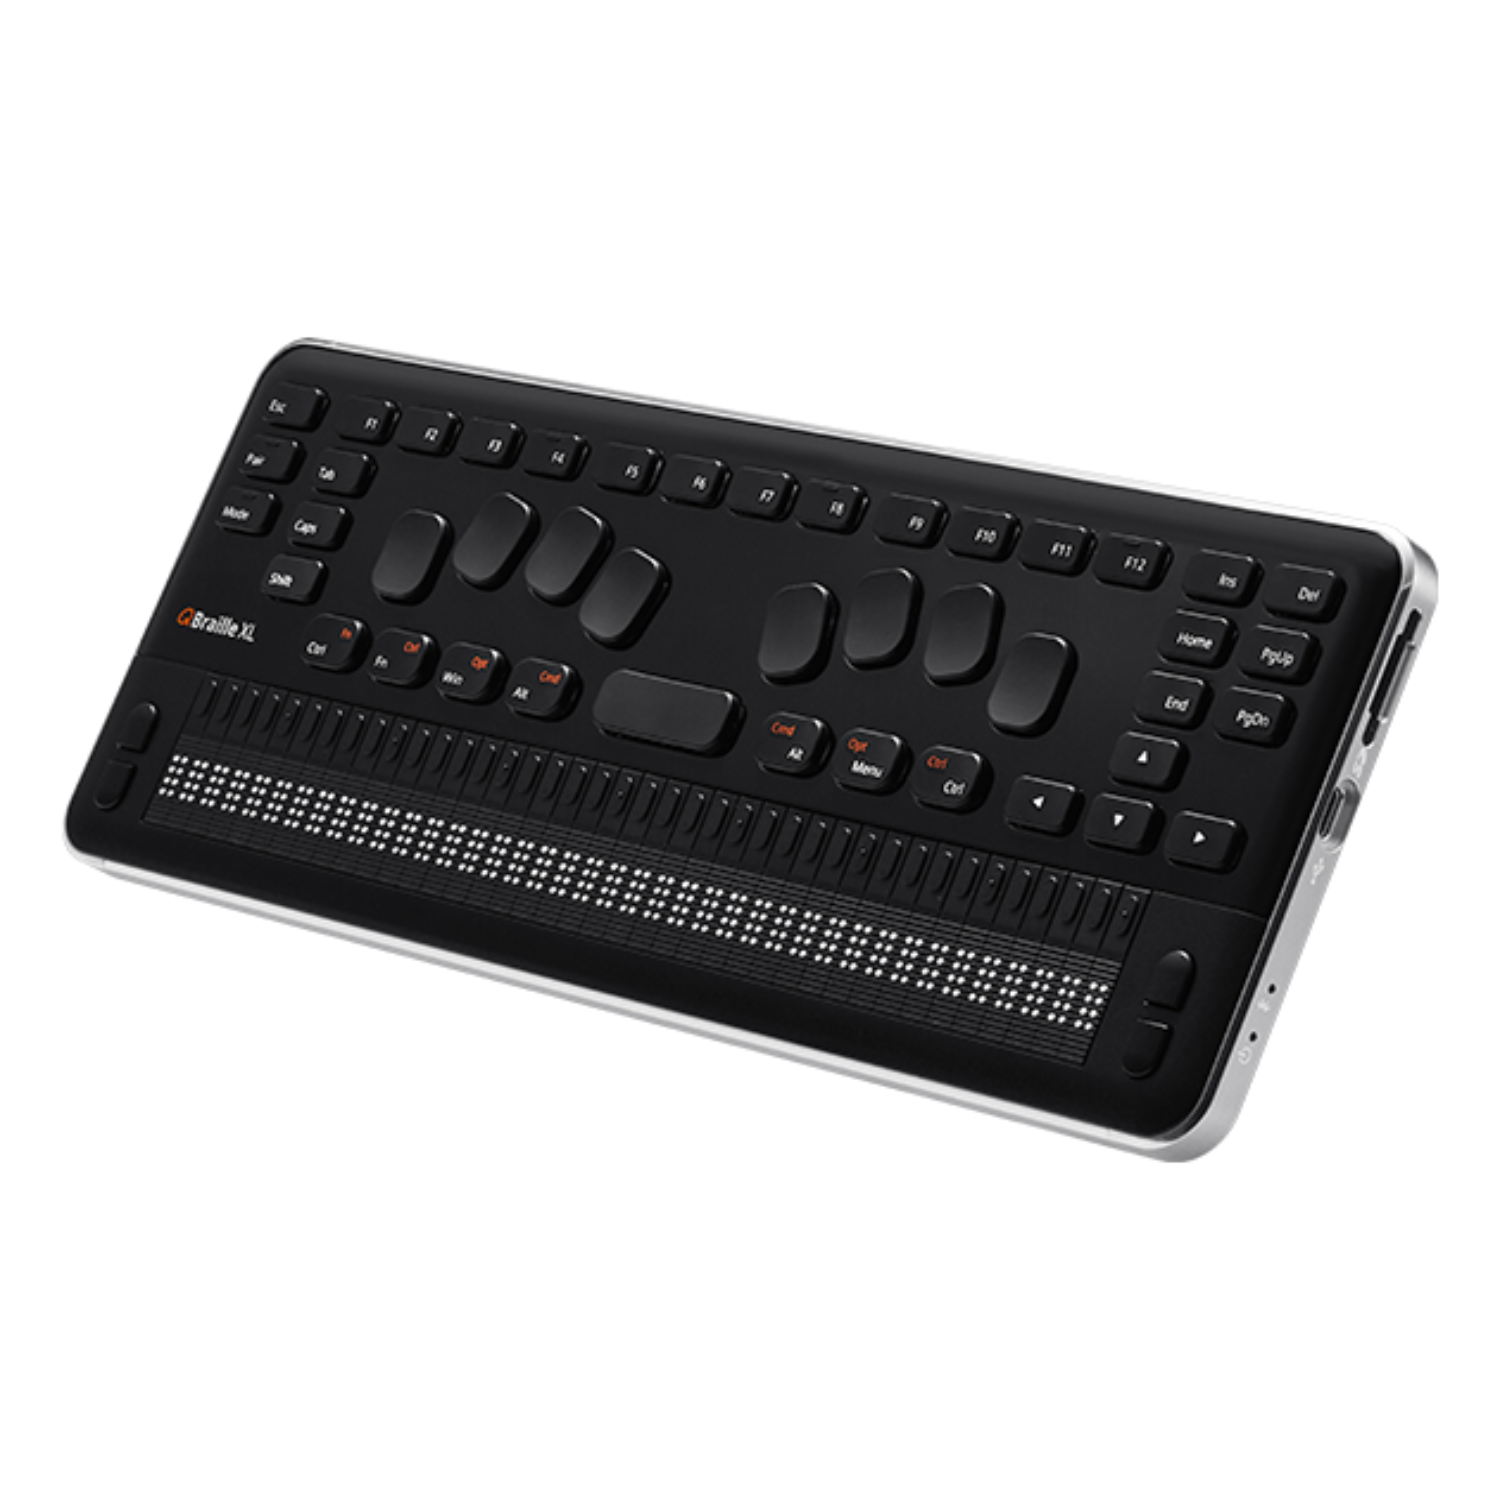 Image of the QBraille XL refreshable braille display and keyboard from HIMS Inc